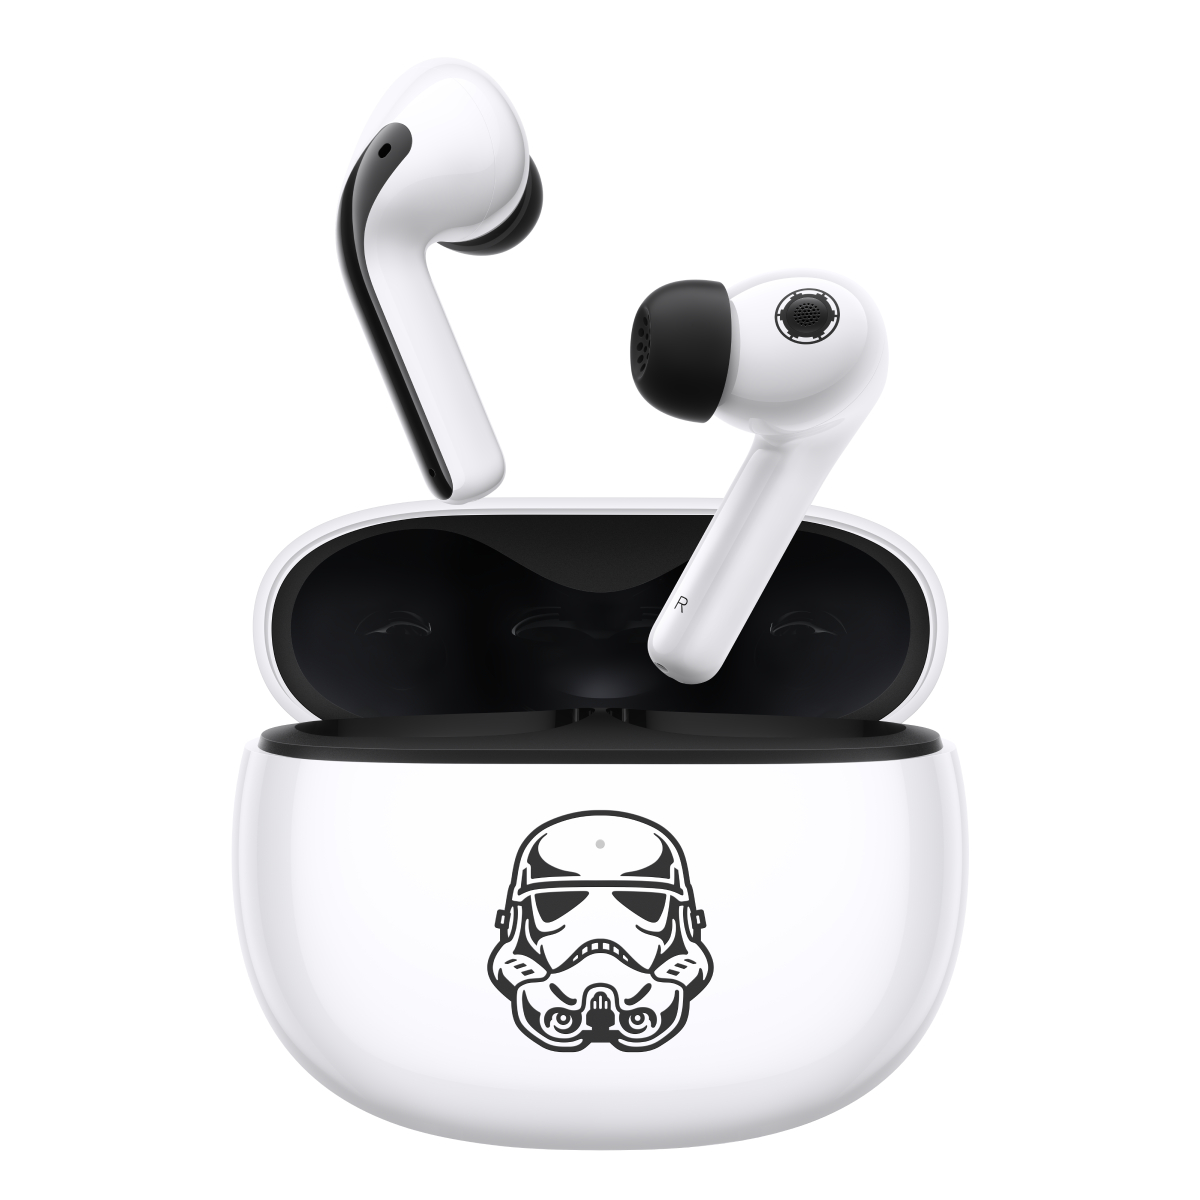 Xiaomi Buds 3 Star Wars Edition (Stormtrooper), , large image number 2